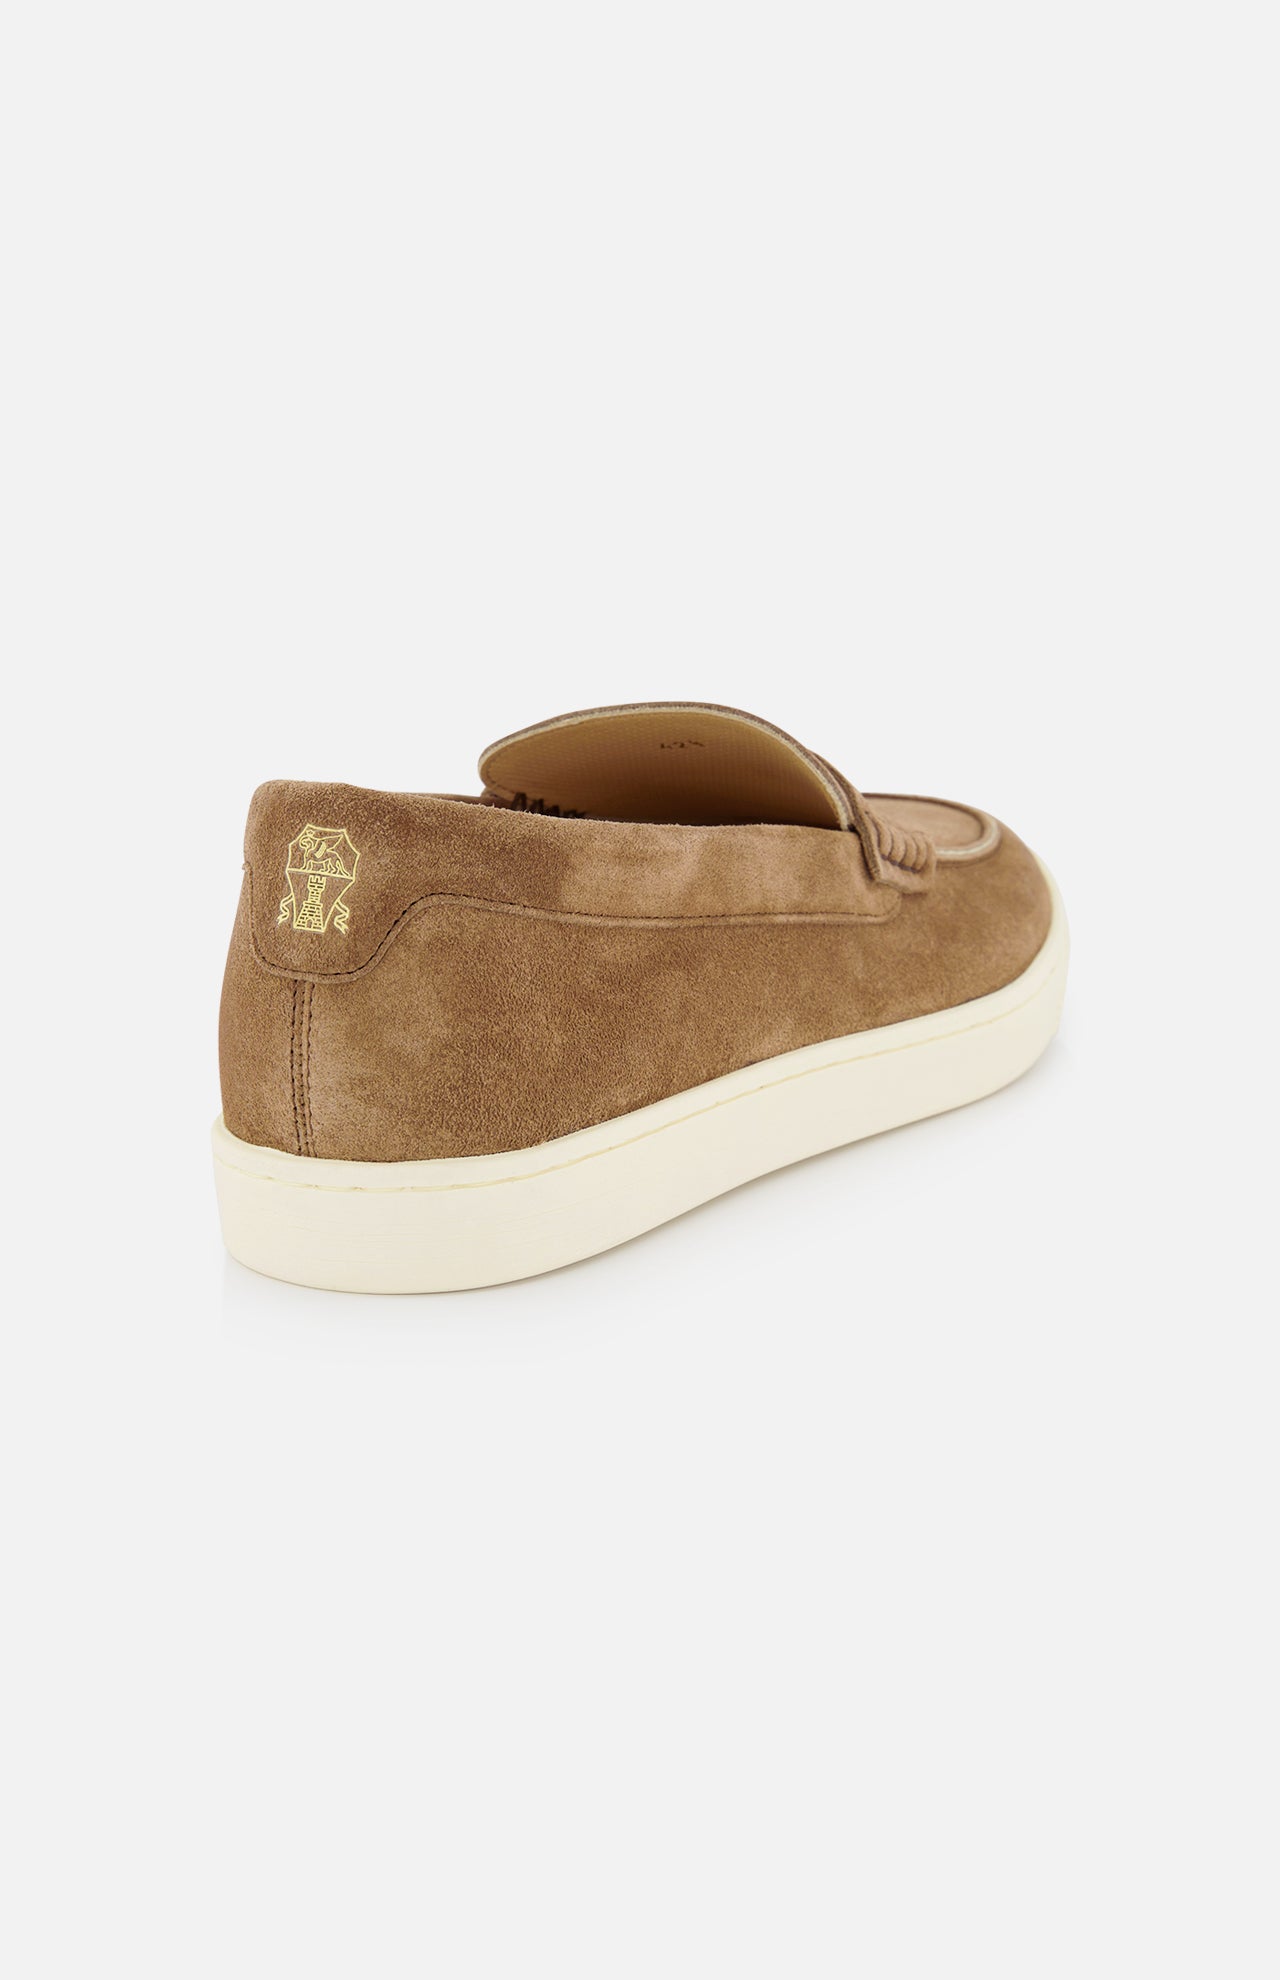 Loafers (7366529253491)